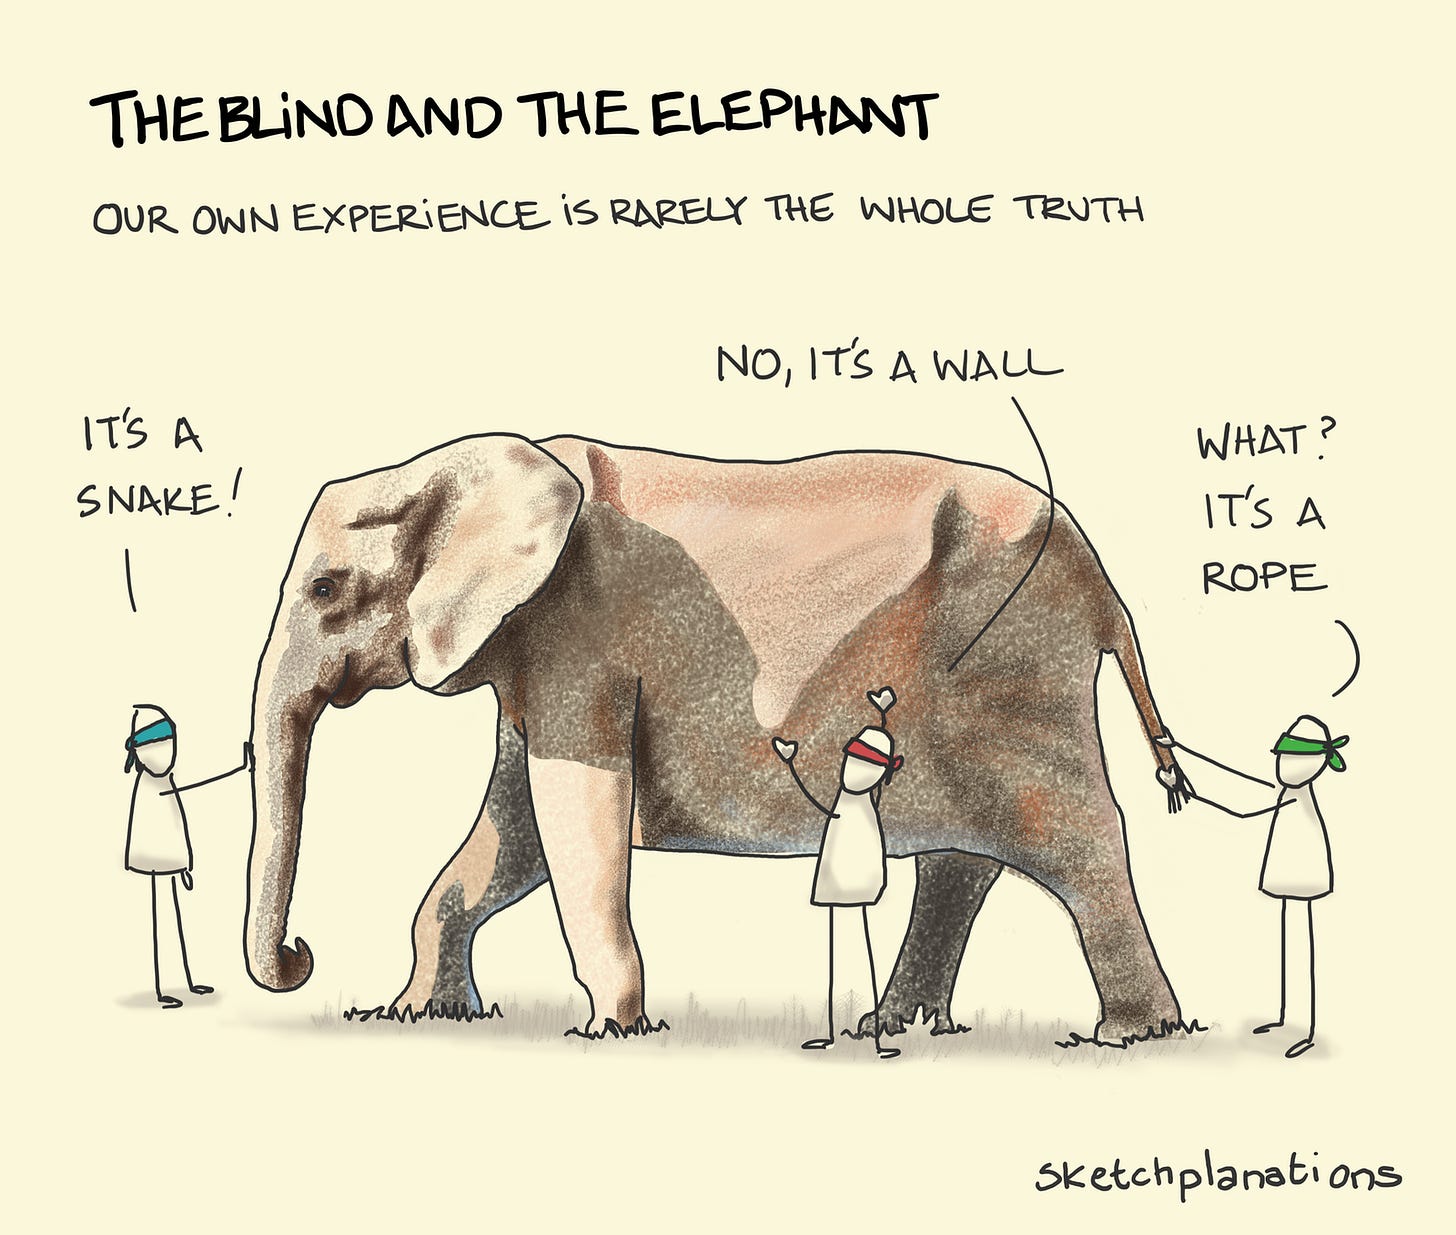 The blind and the elephant - Sketchplanations